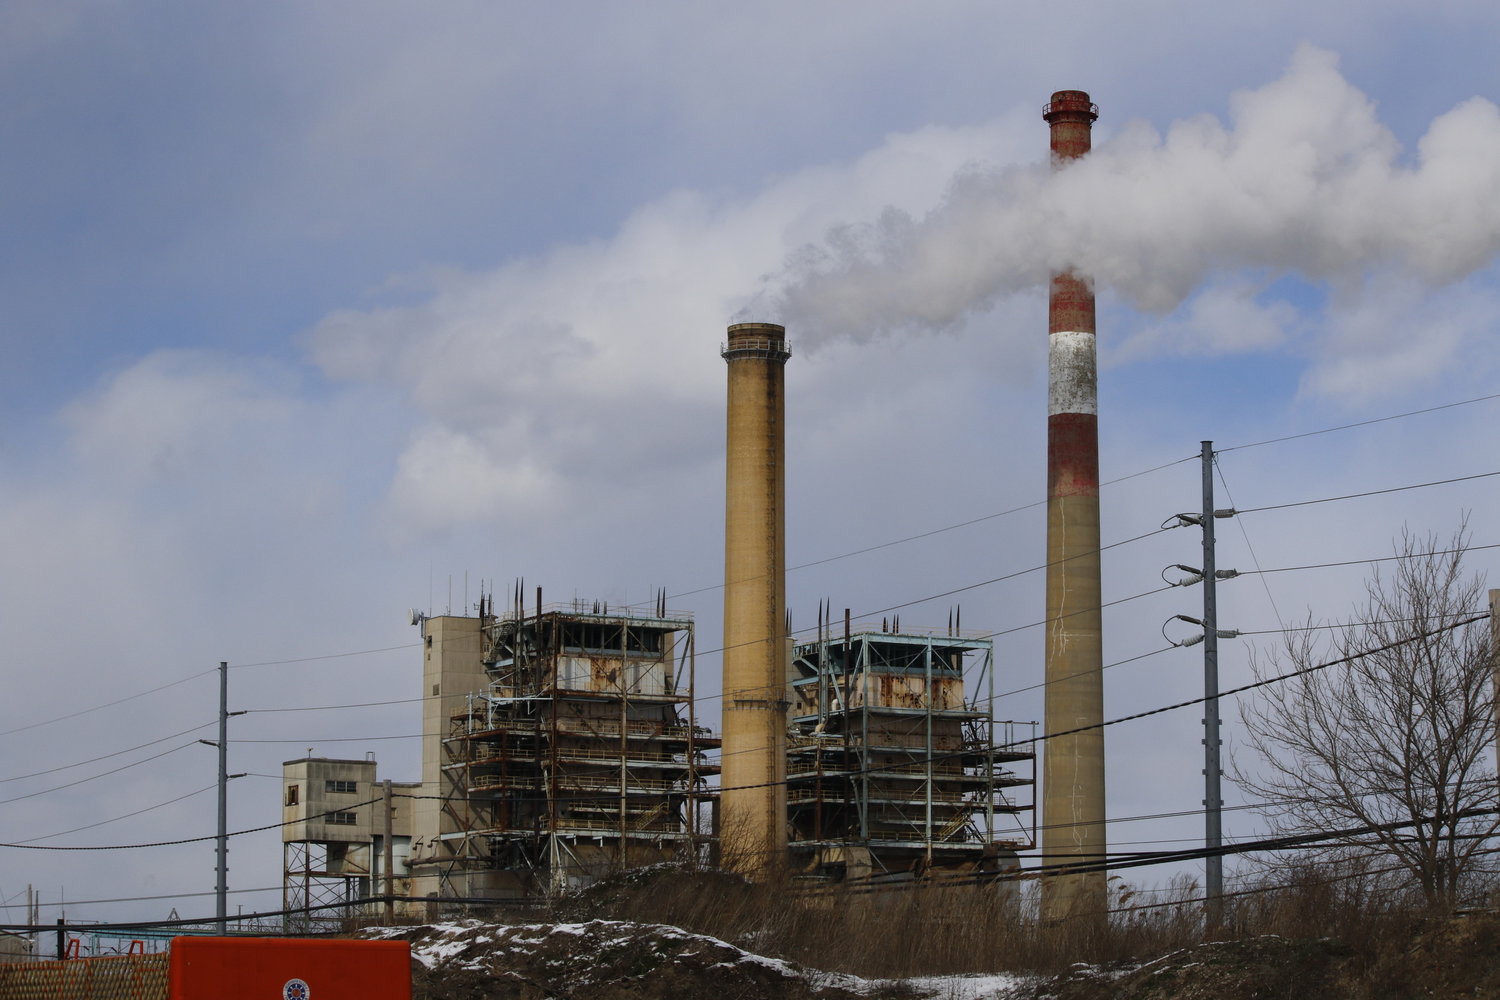 The E.F. Barrett Power Plant, in Island Park, produces a million tons of fossil fuel emissions each year. This, among other reasons, is why Sen. Todd Kaminsky is fighting to have the village designated as environmentally disadvantaged.